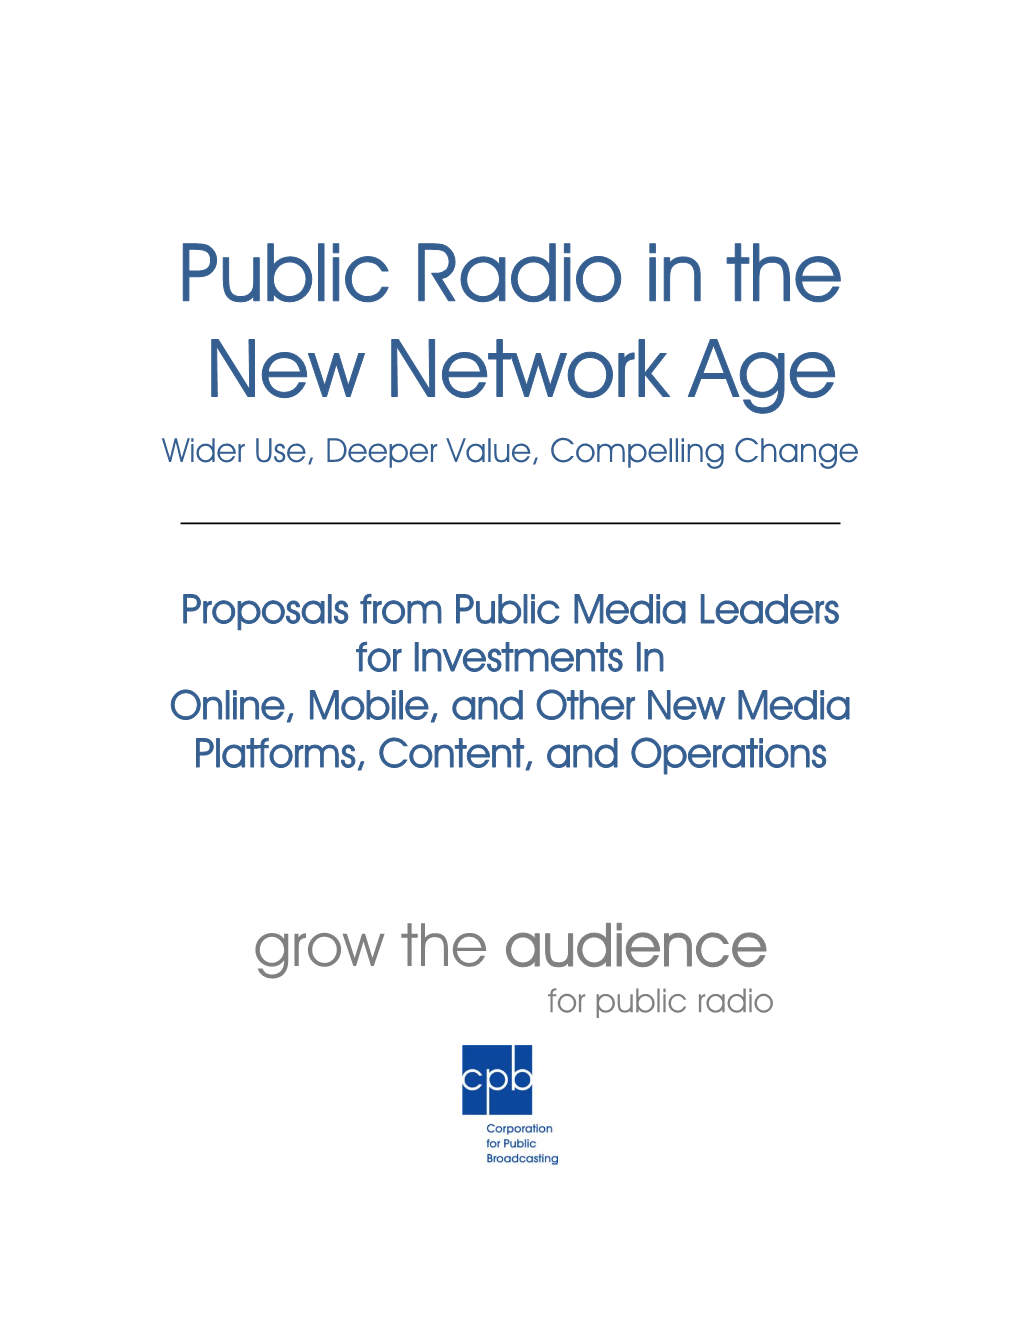 Proposals for Investments in New Media